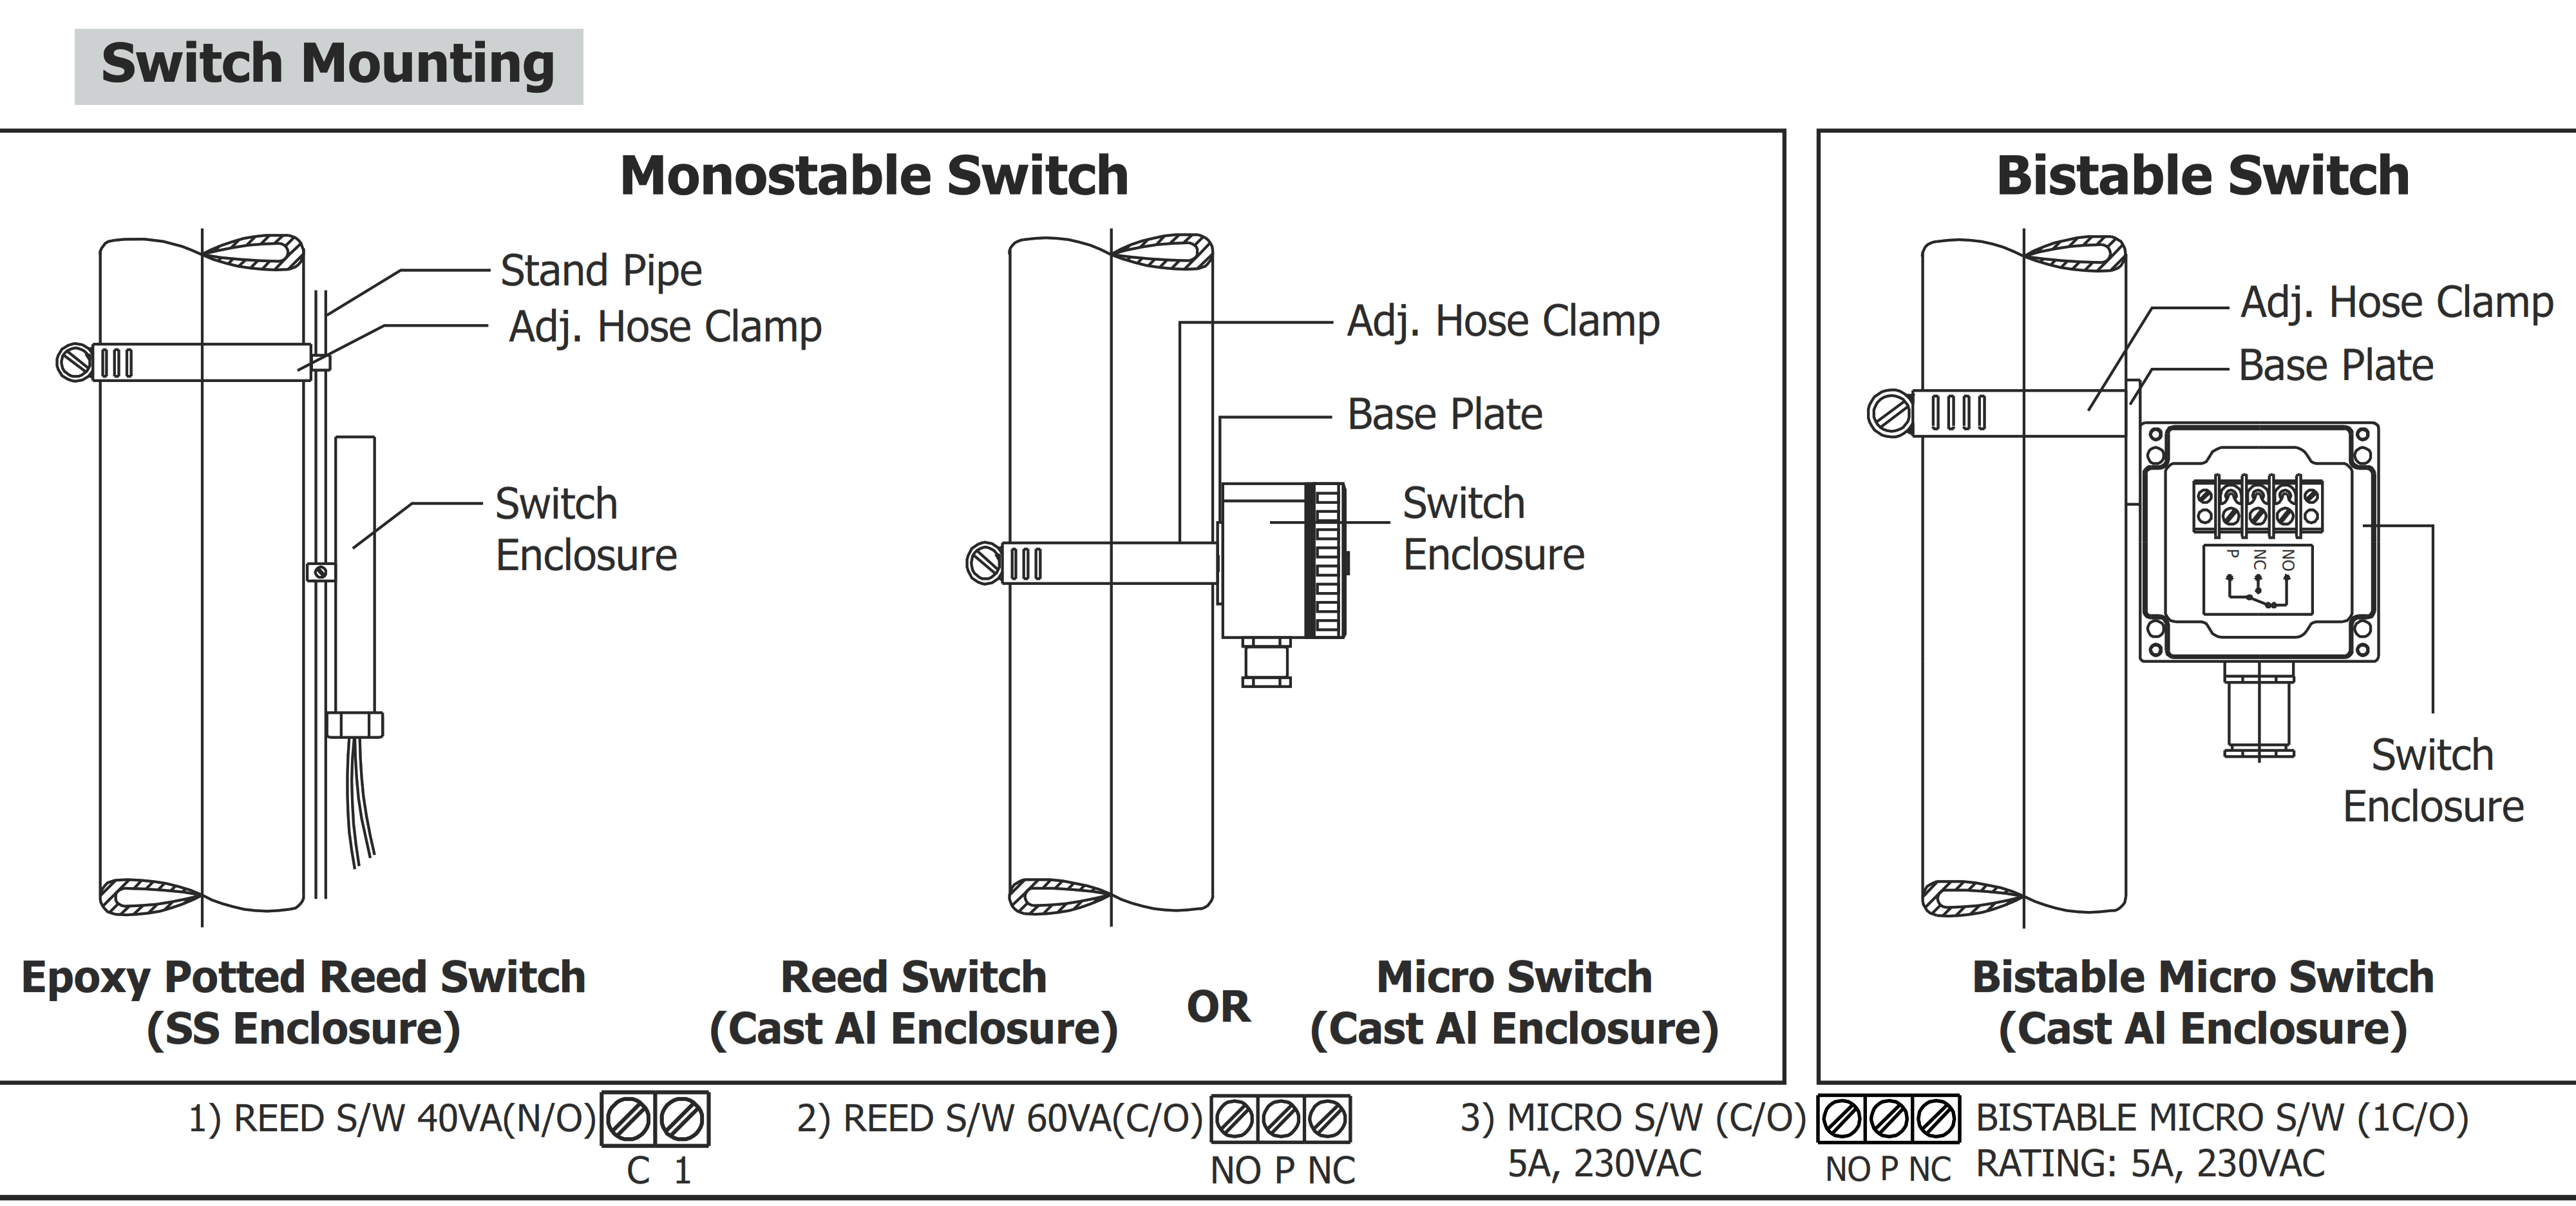 External Mounting of Switch on Gauge